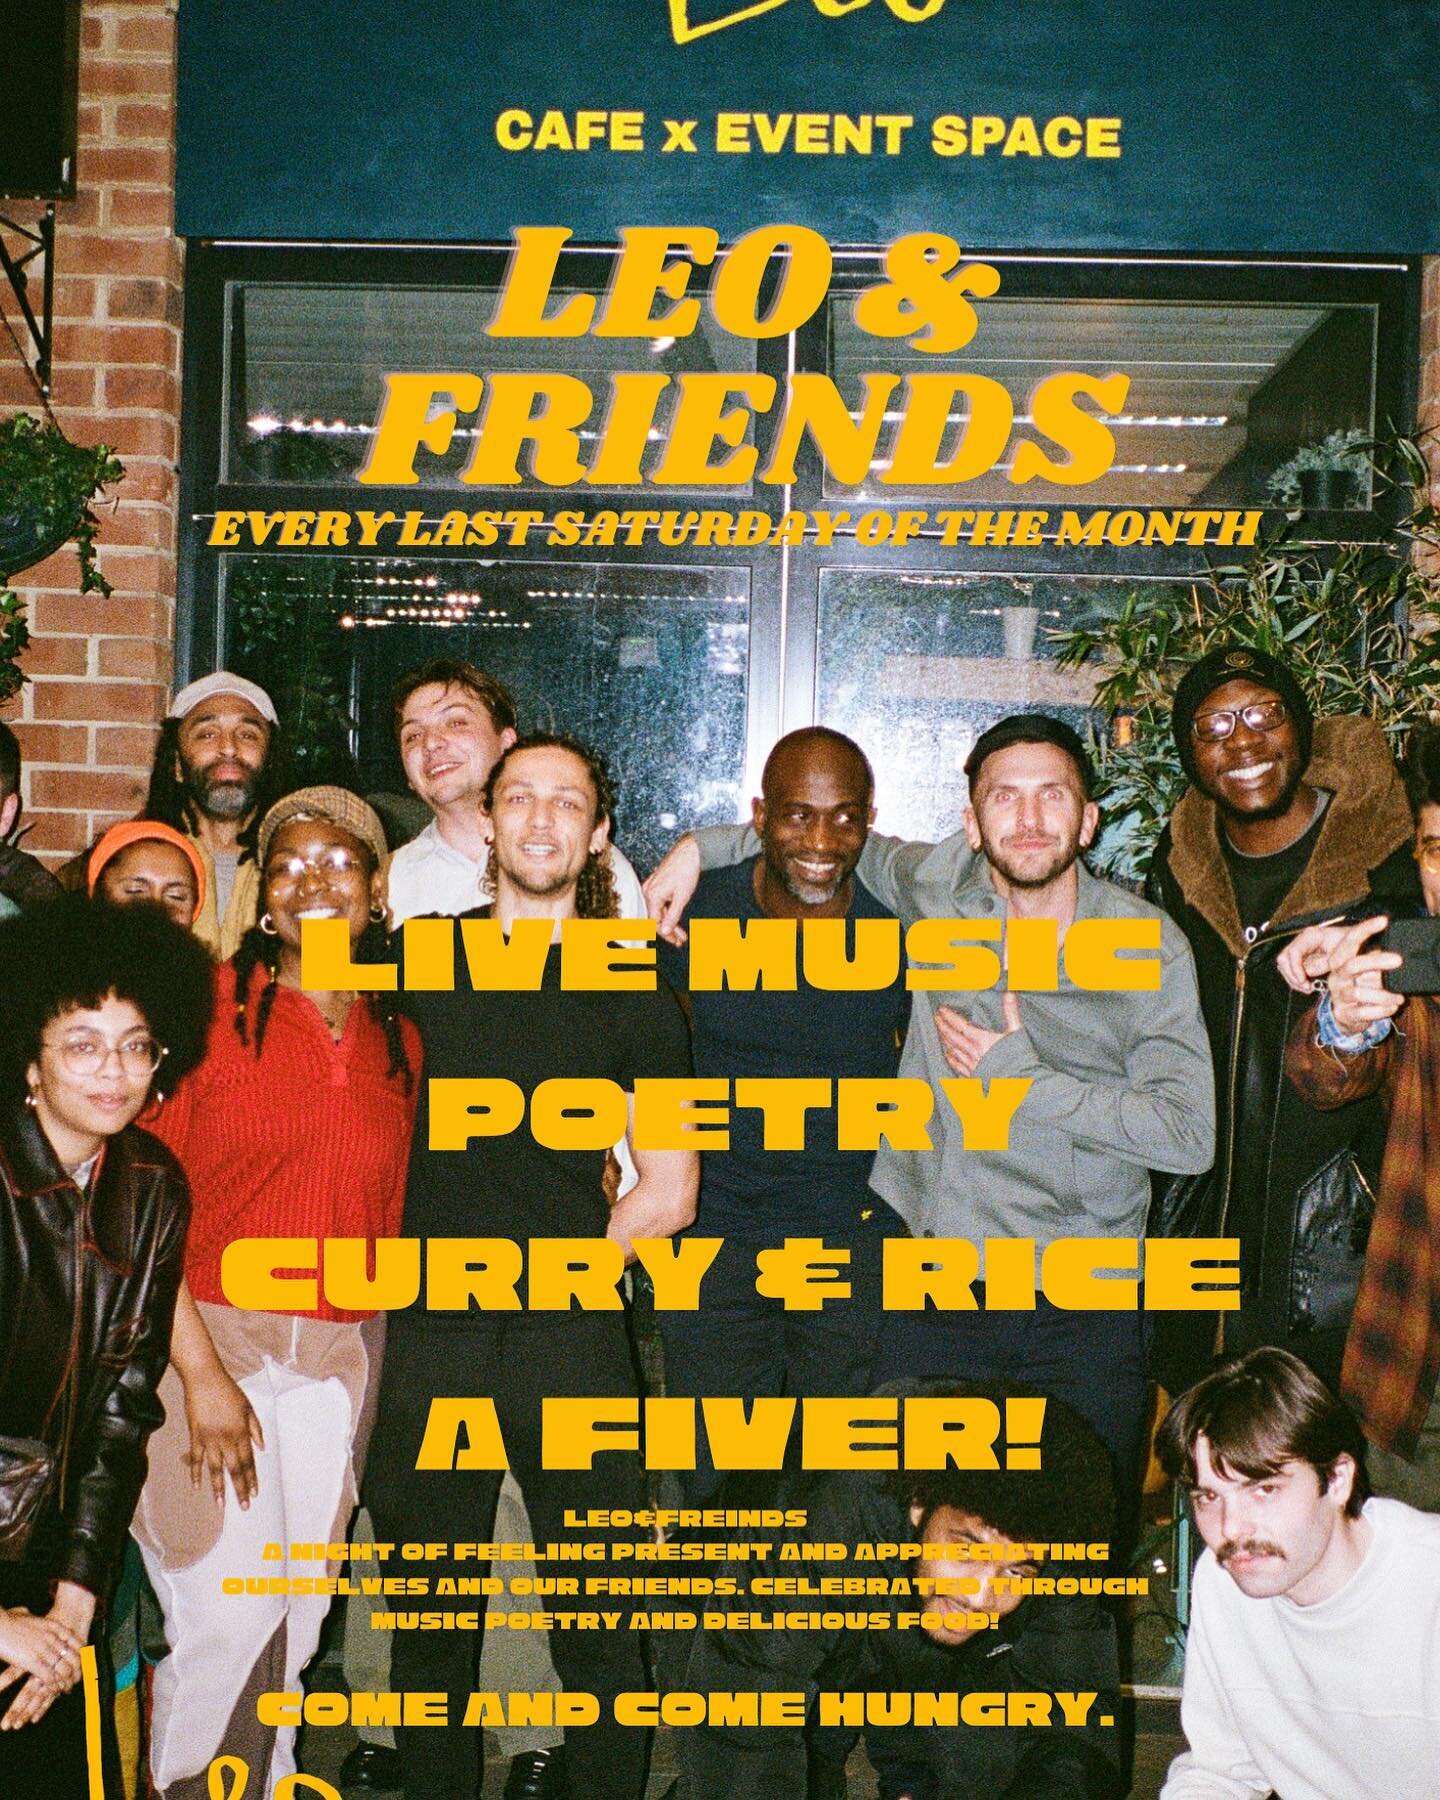 THE NEXT LEO &amp; FRIENDS 27th MAY. We got some big things happening for this night. Come chill, party and have a bloody nice time with your friends. Tickets are a FIVER&hellip;.and thats with dinner! please pre book 💛 Tickets via link in our bio x